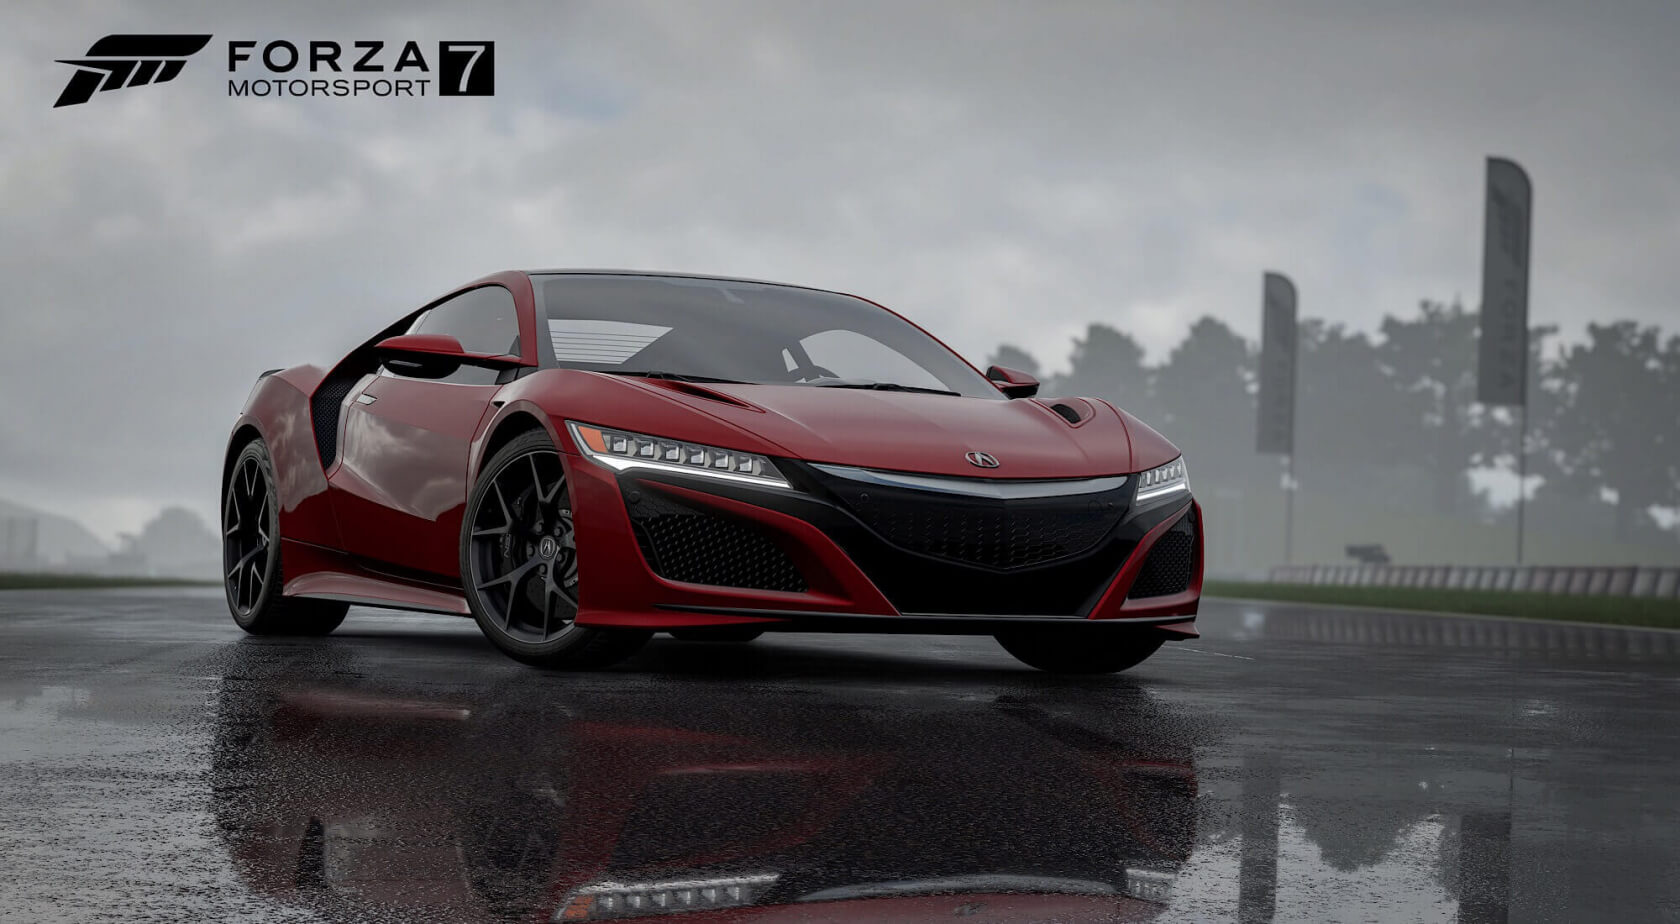 Forza 7 VIP system falling back to previous version due to fan outrage